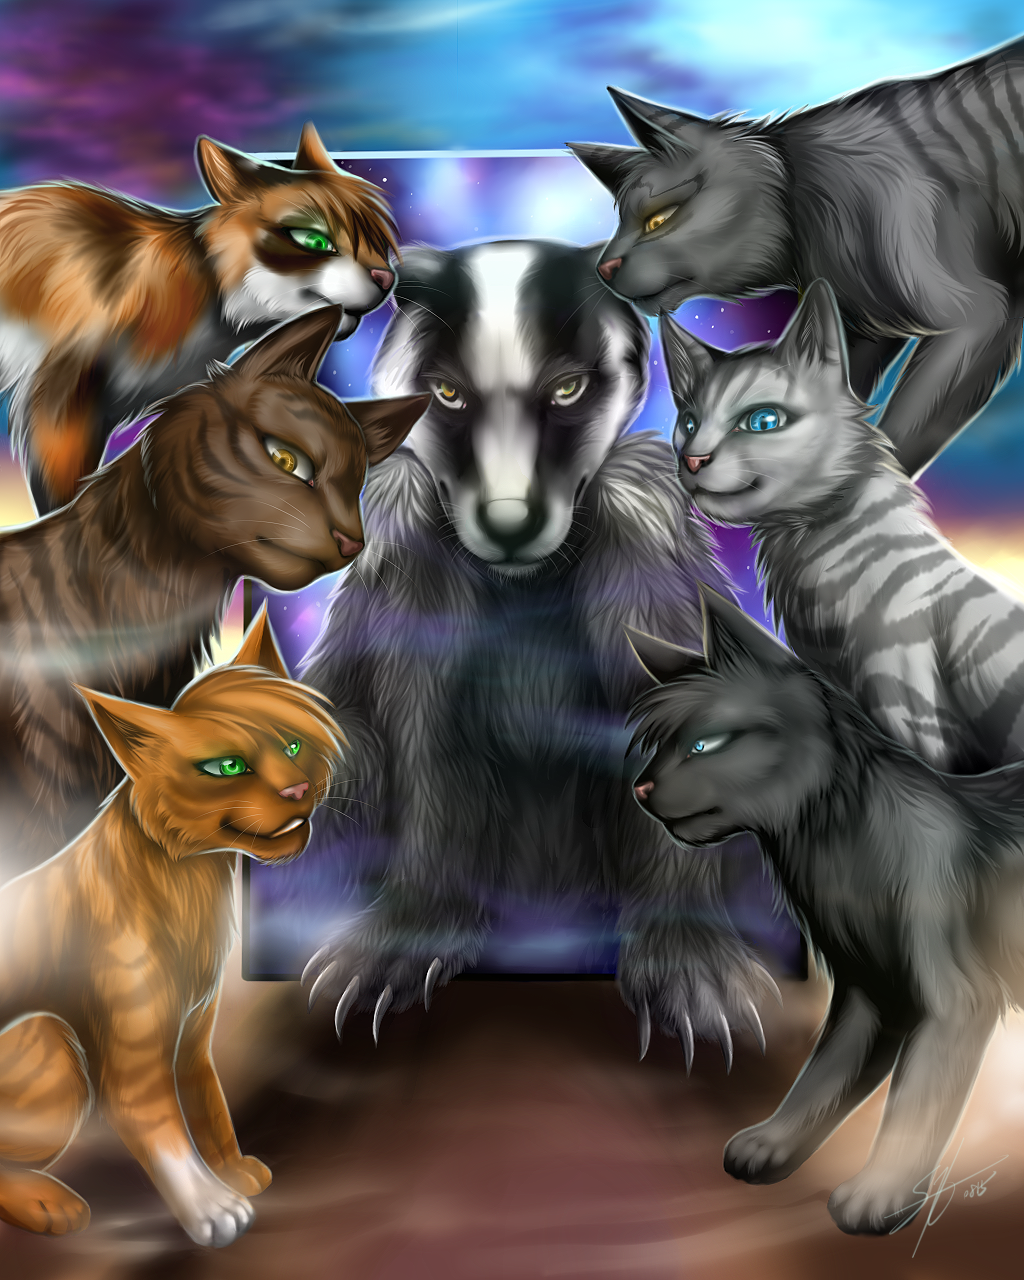 Warriors: Midnight and six cats by Marshcold on DeviantArt